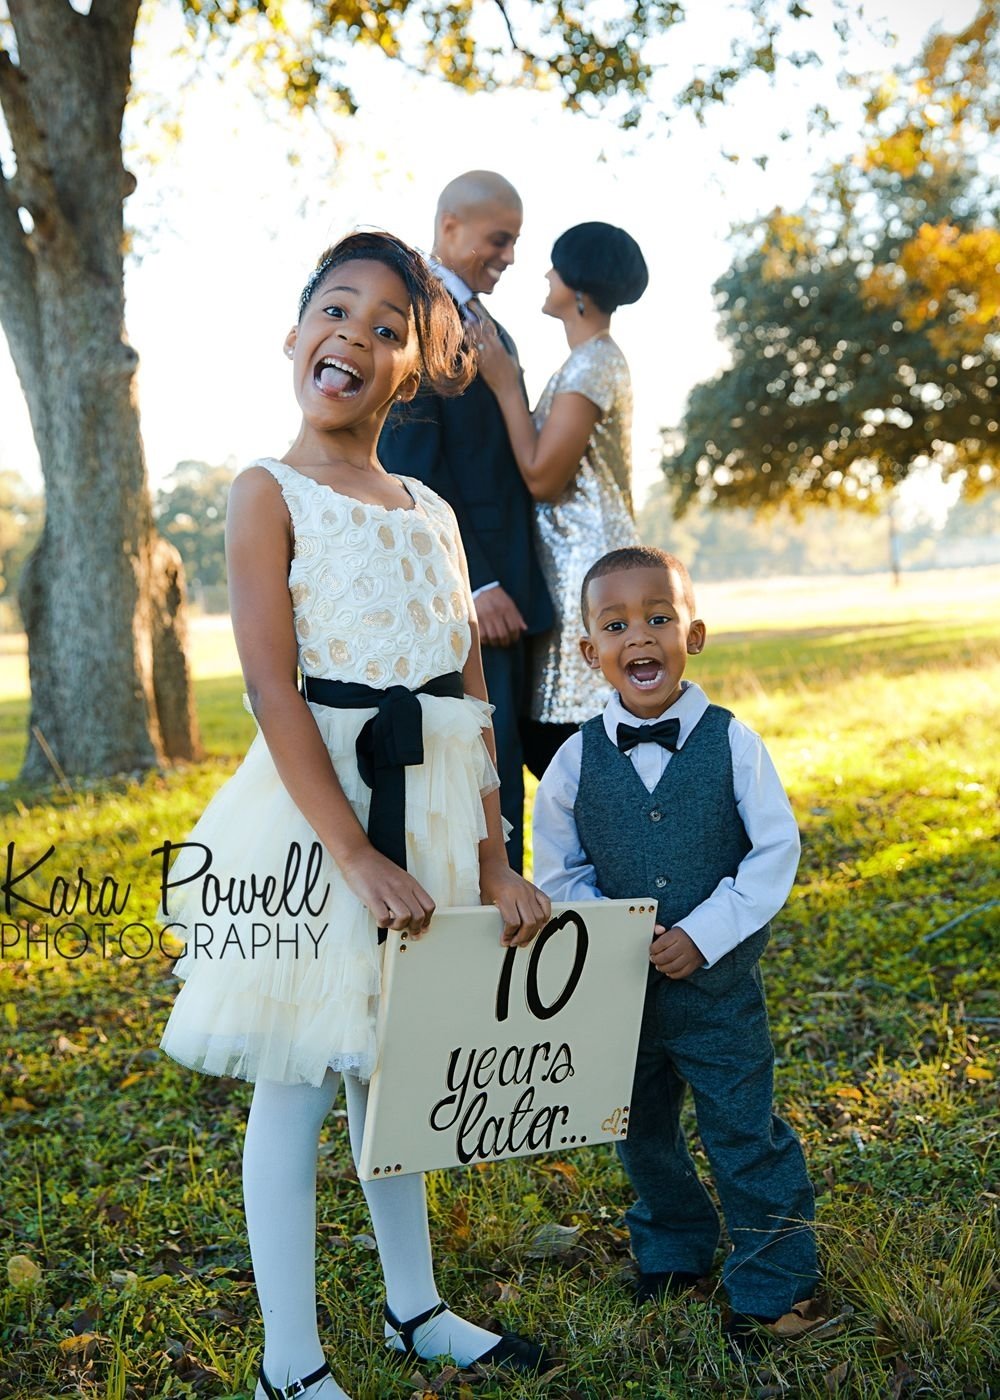 10 Lovely Ideas For 10 Year Anniversary the woodlands tx family celebrating ten years kara powell 2023